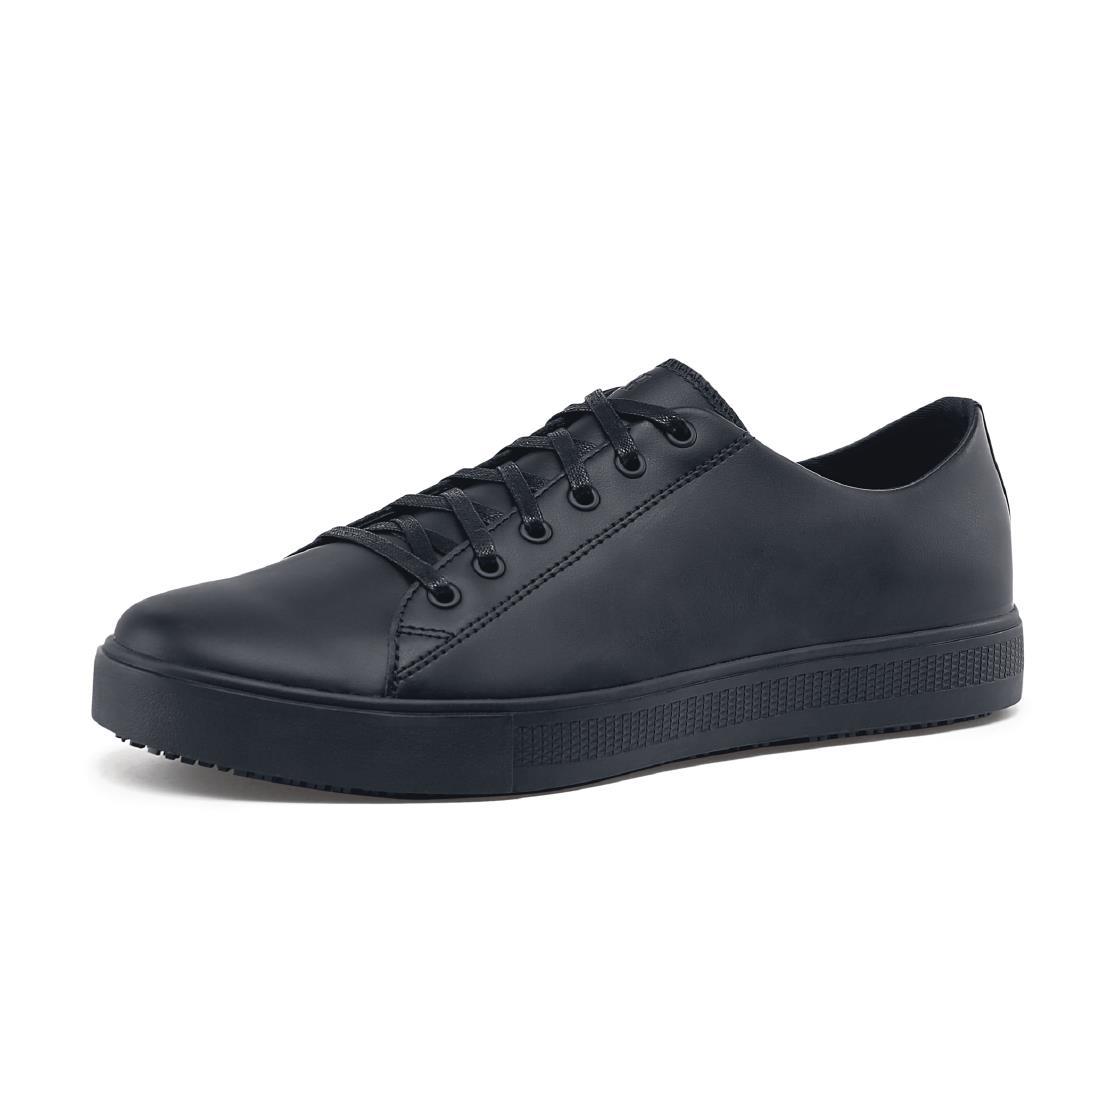 Shoes for Crews Old School Trainers Black 36 - BB161-36  - 6